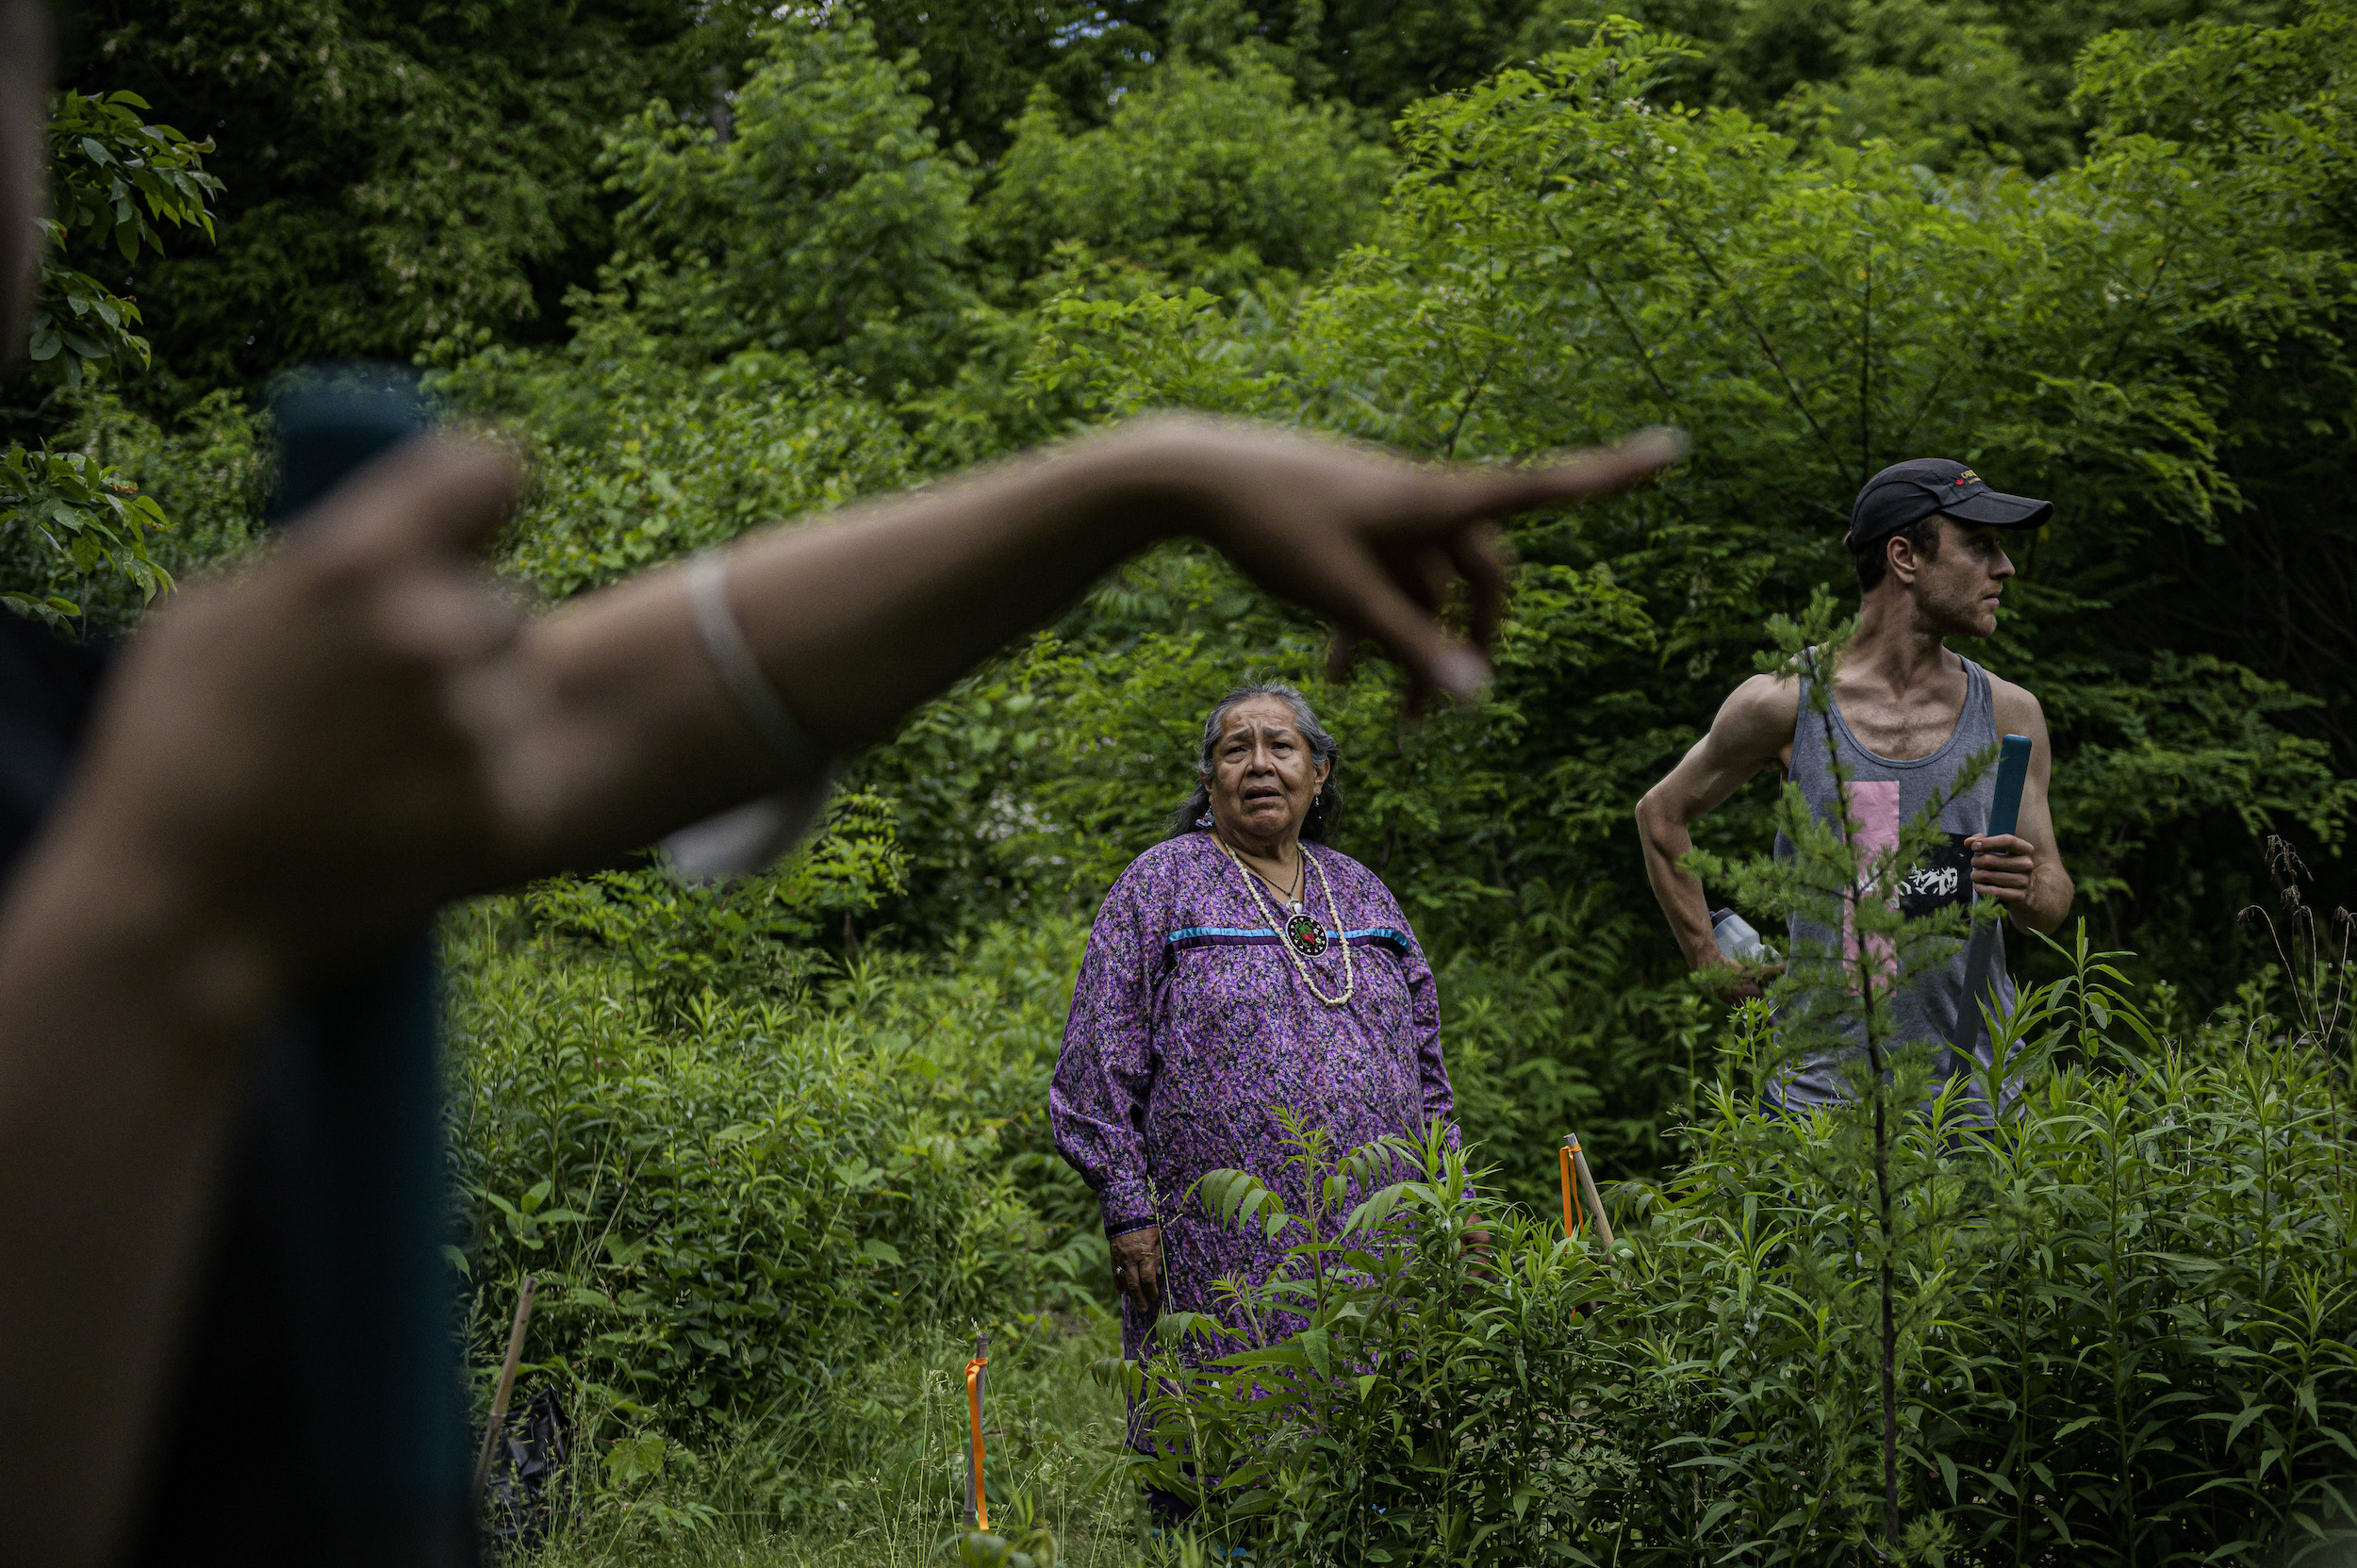 Donna Powless, director of Taiaiako’n Historical Preservation Society (THPS) speaks with Callum Schuster (right) and other members of the Indigenous Land Stewardship Circle while they prepare the ground for planting, in High Park, Toronto